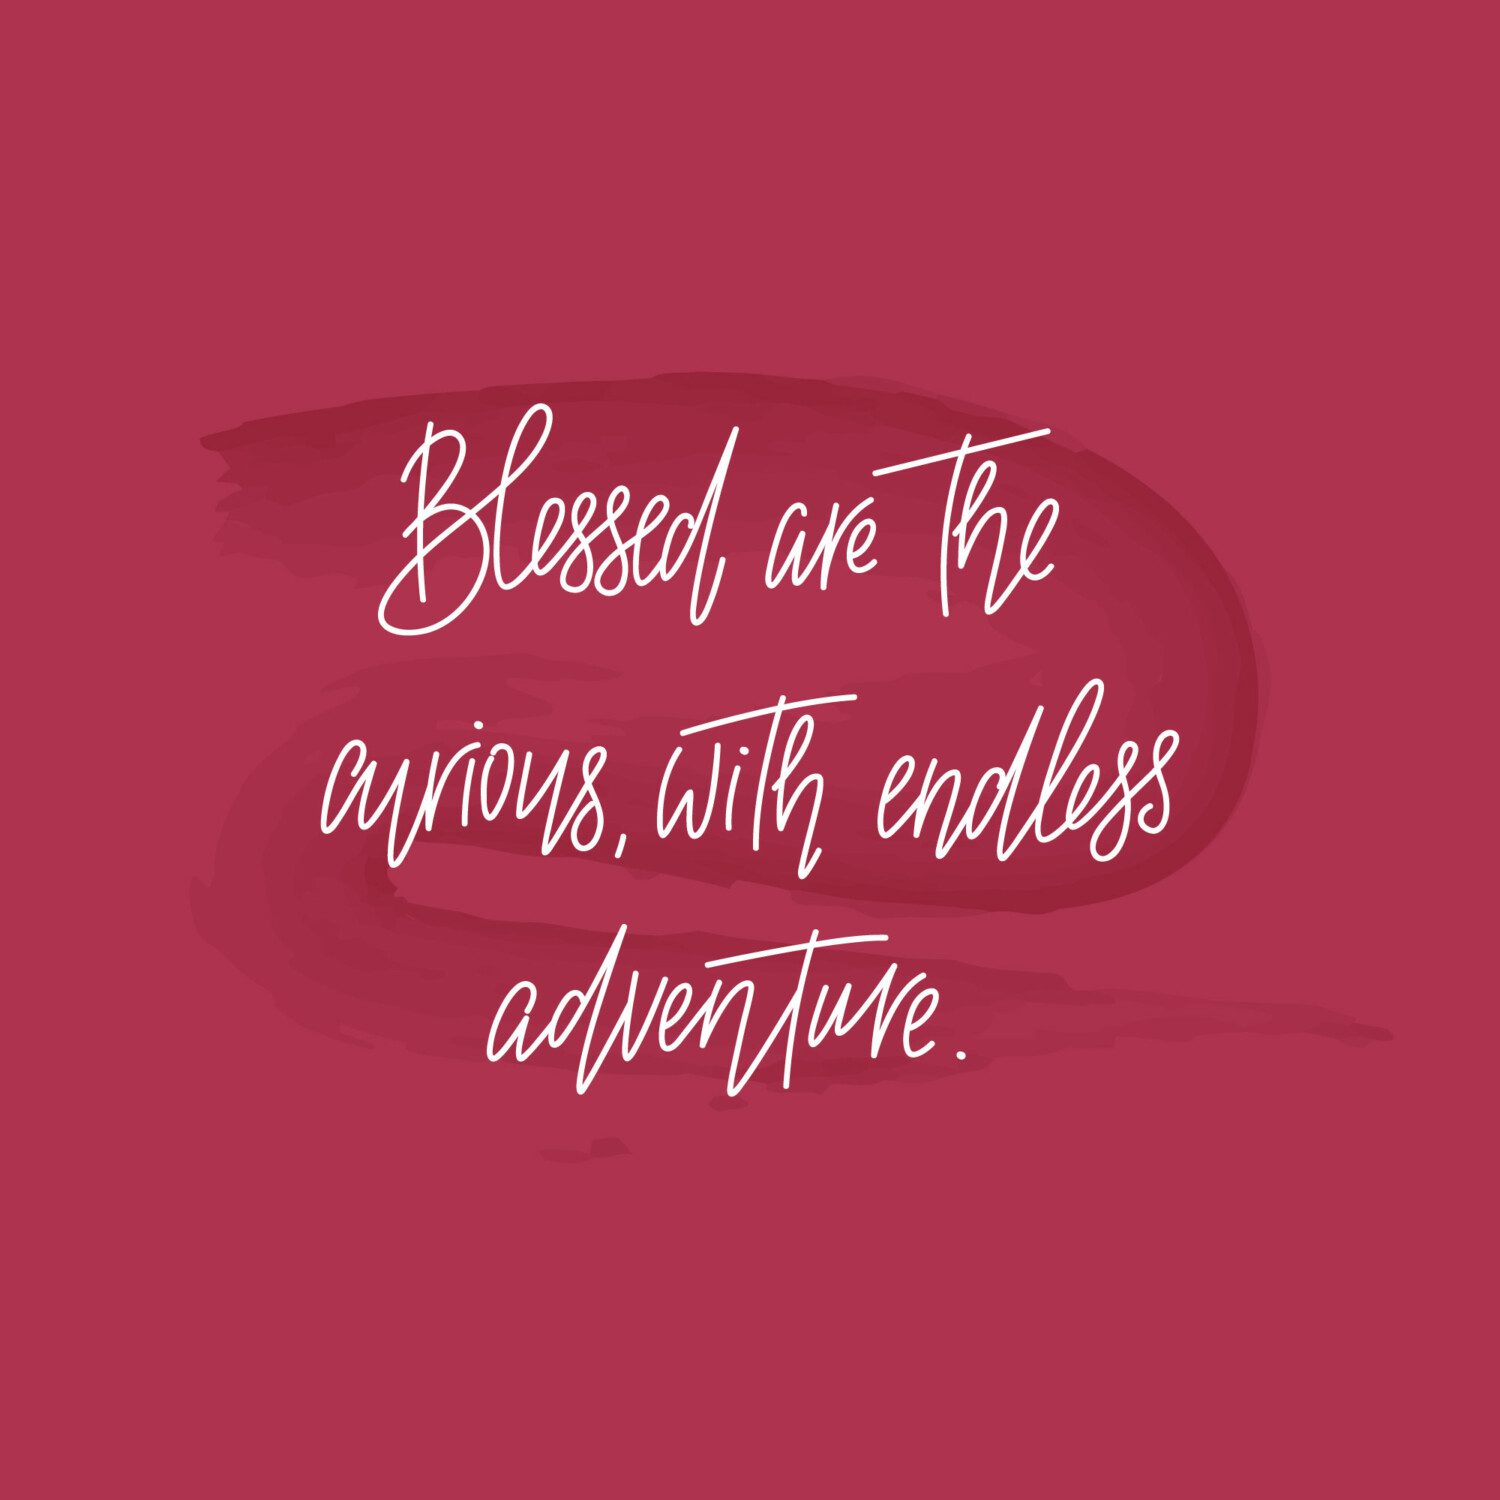 Blessed are the curious, with endless adventure.